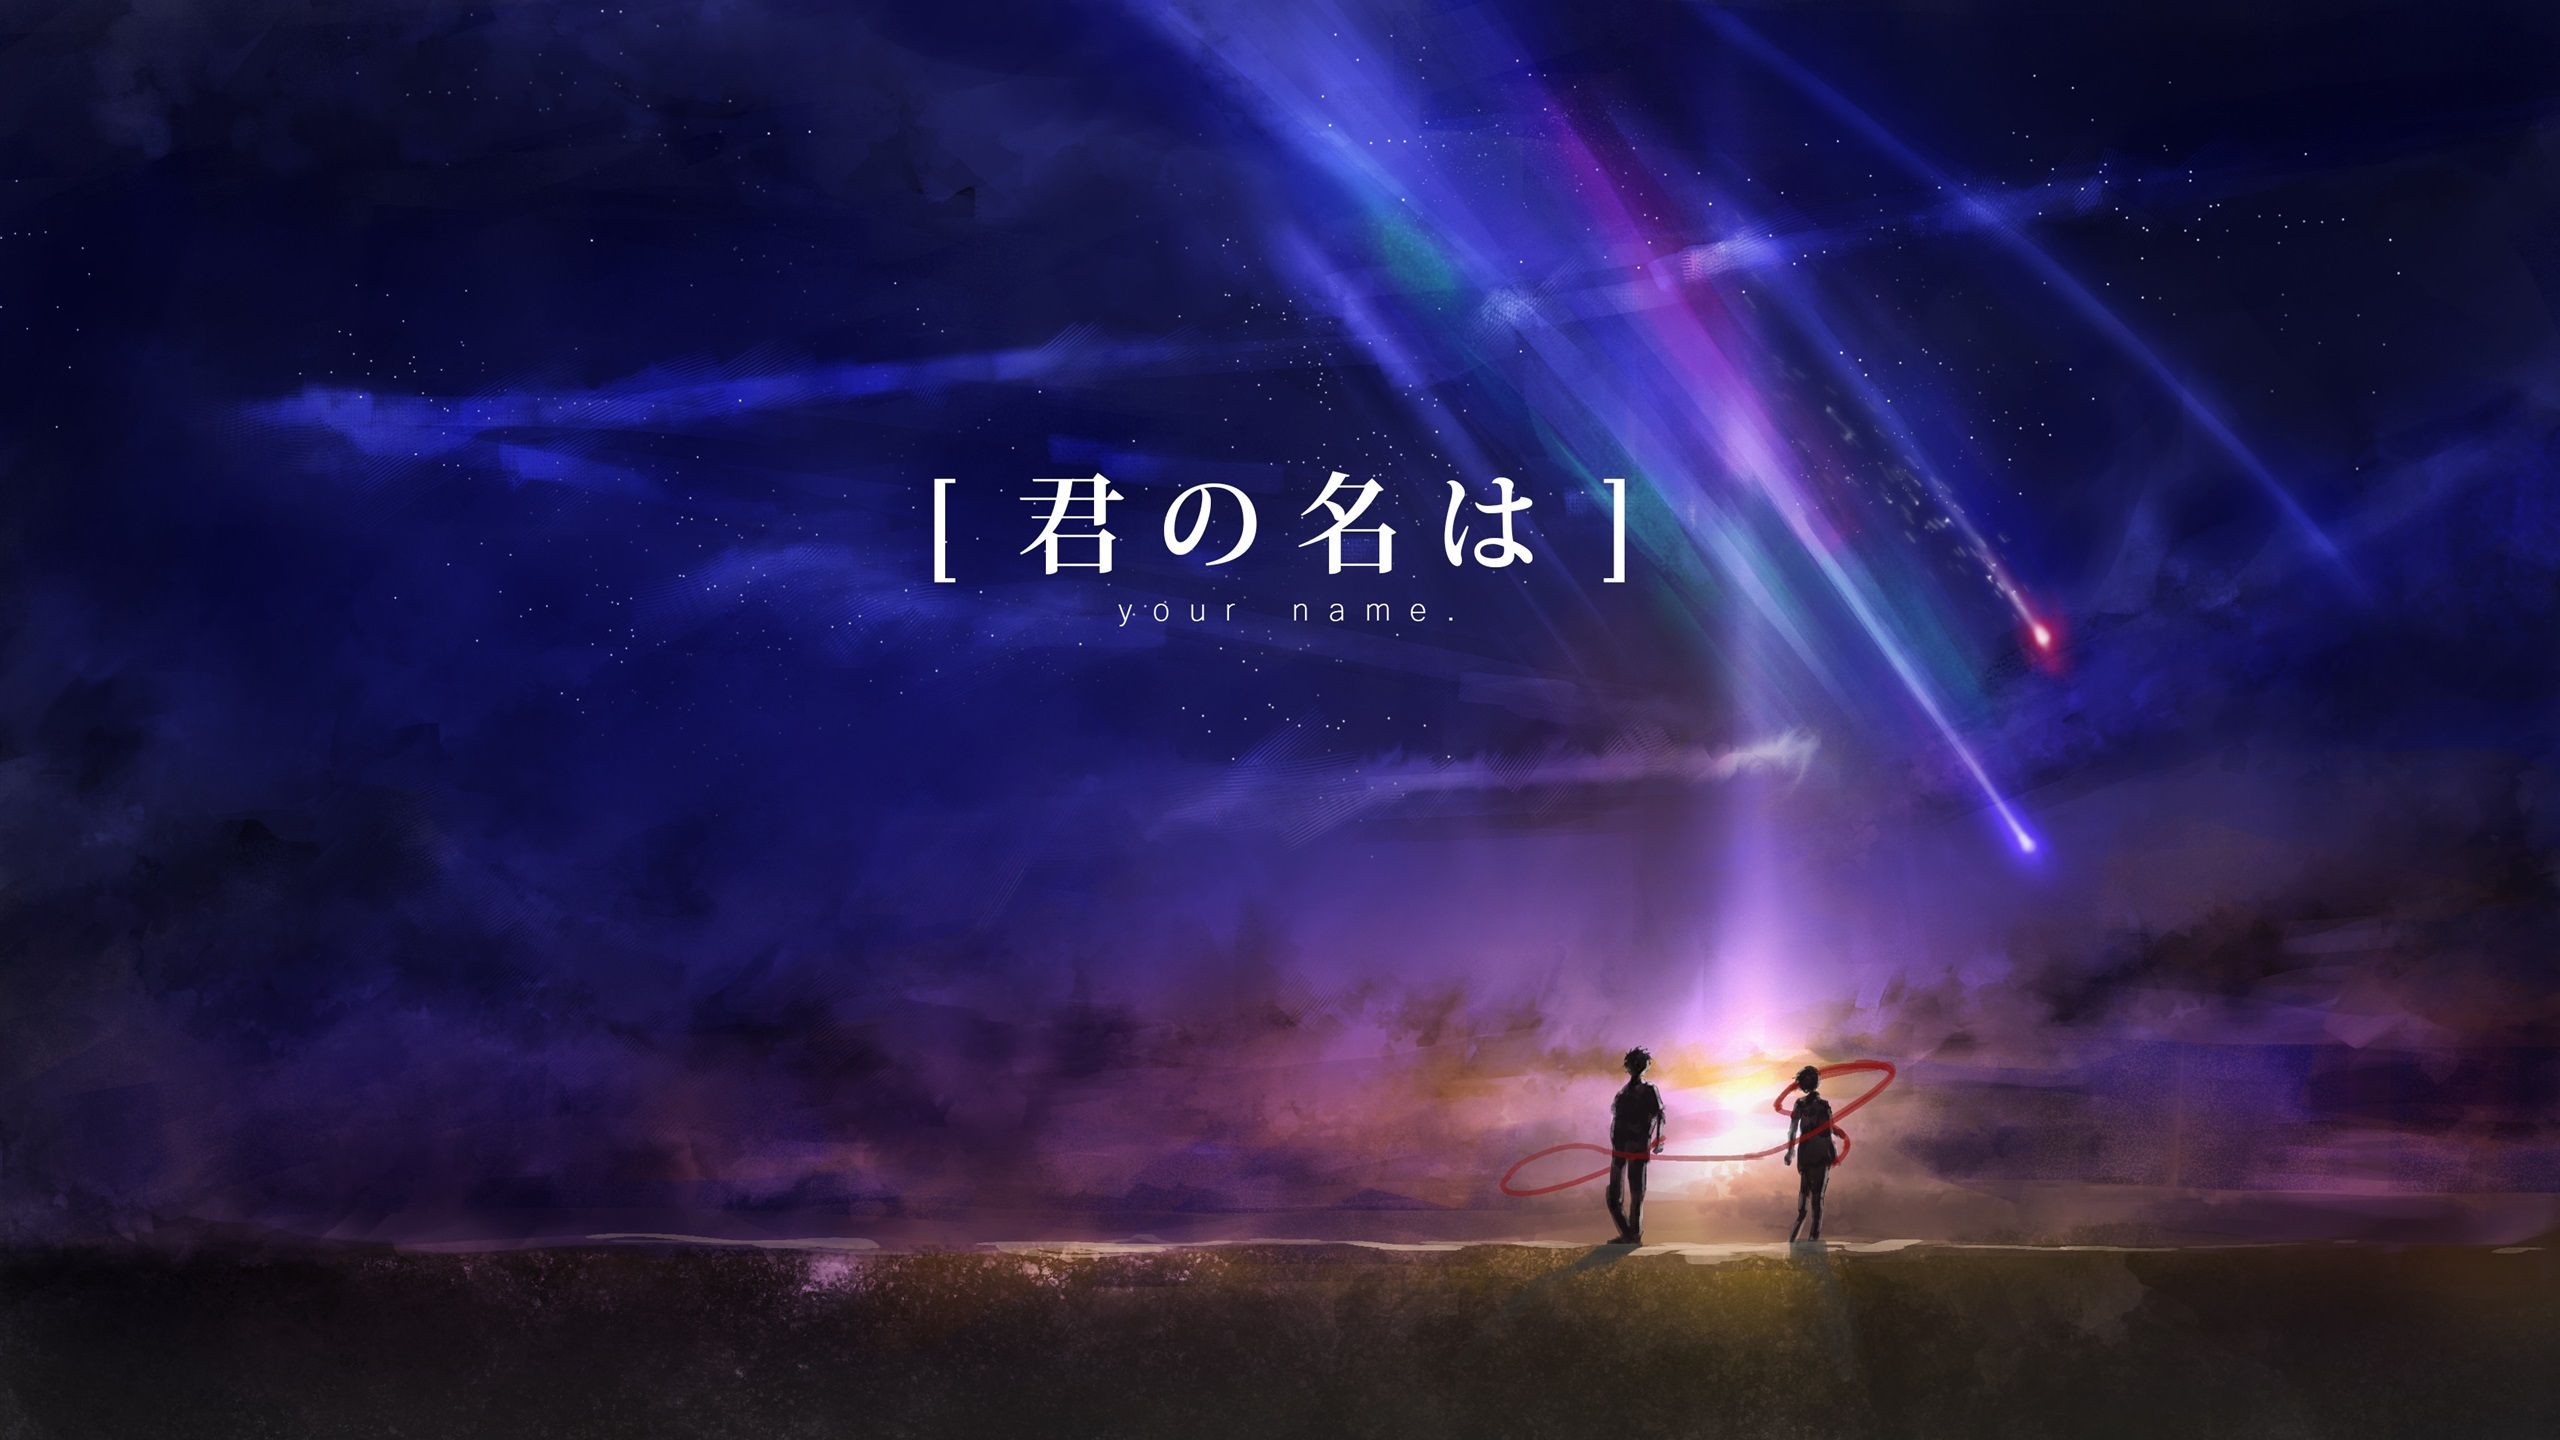 Your Name Anime Hd Wallpapers - Wallpaper Cave